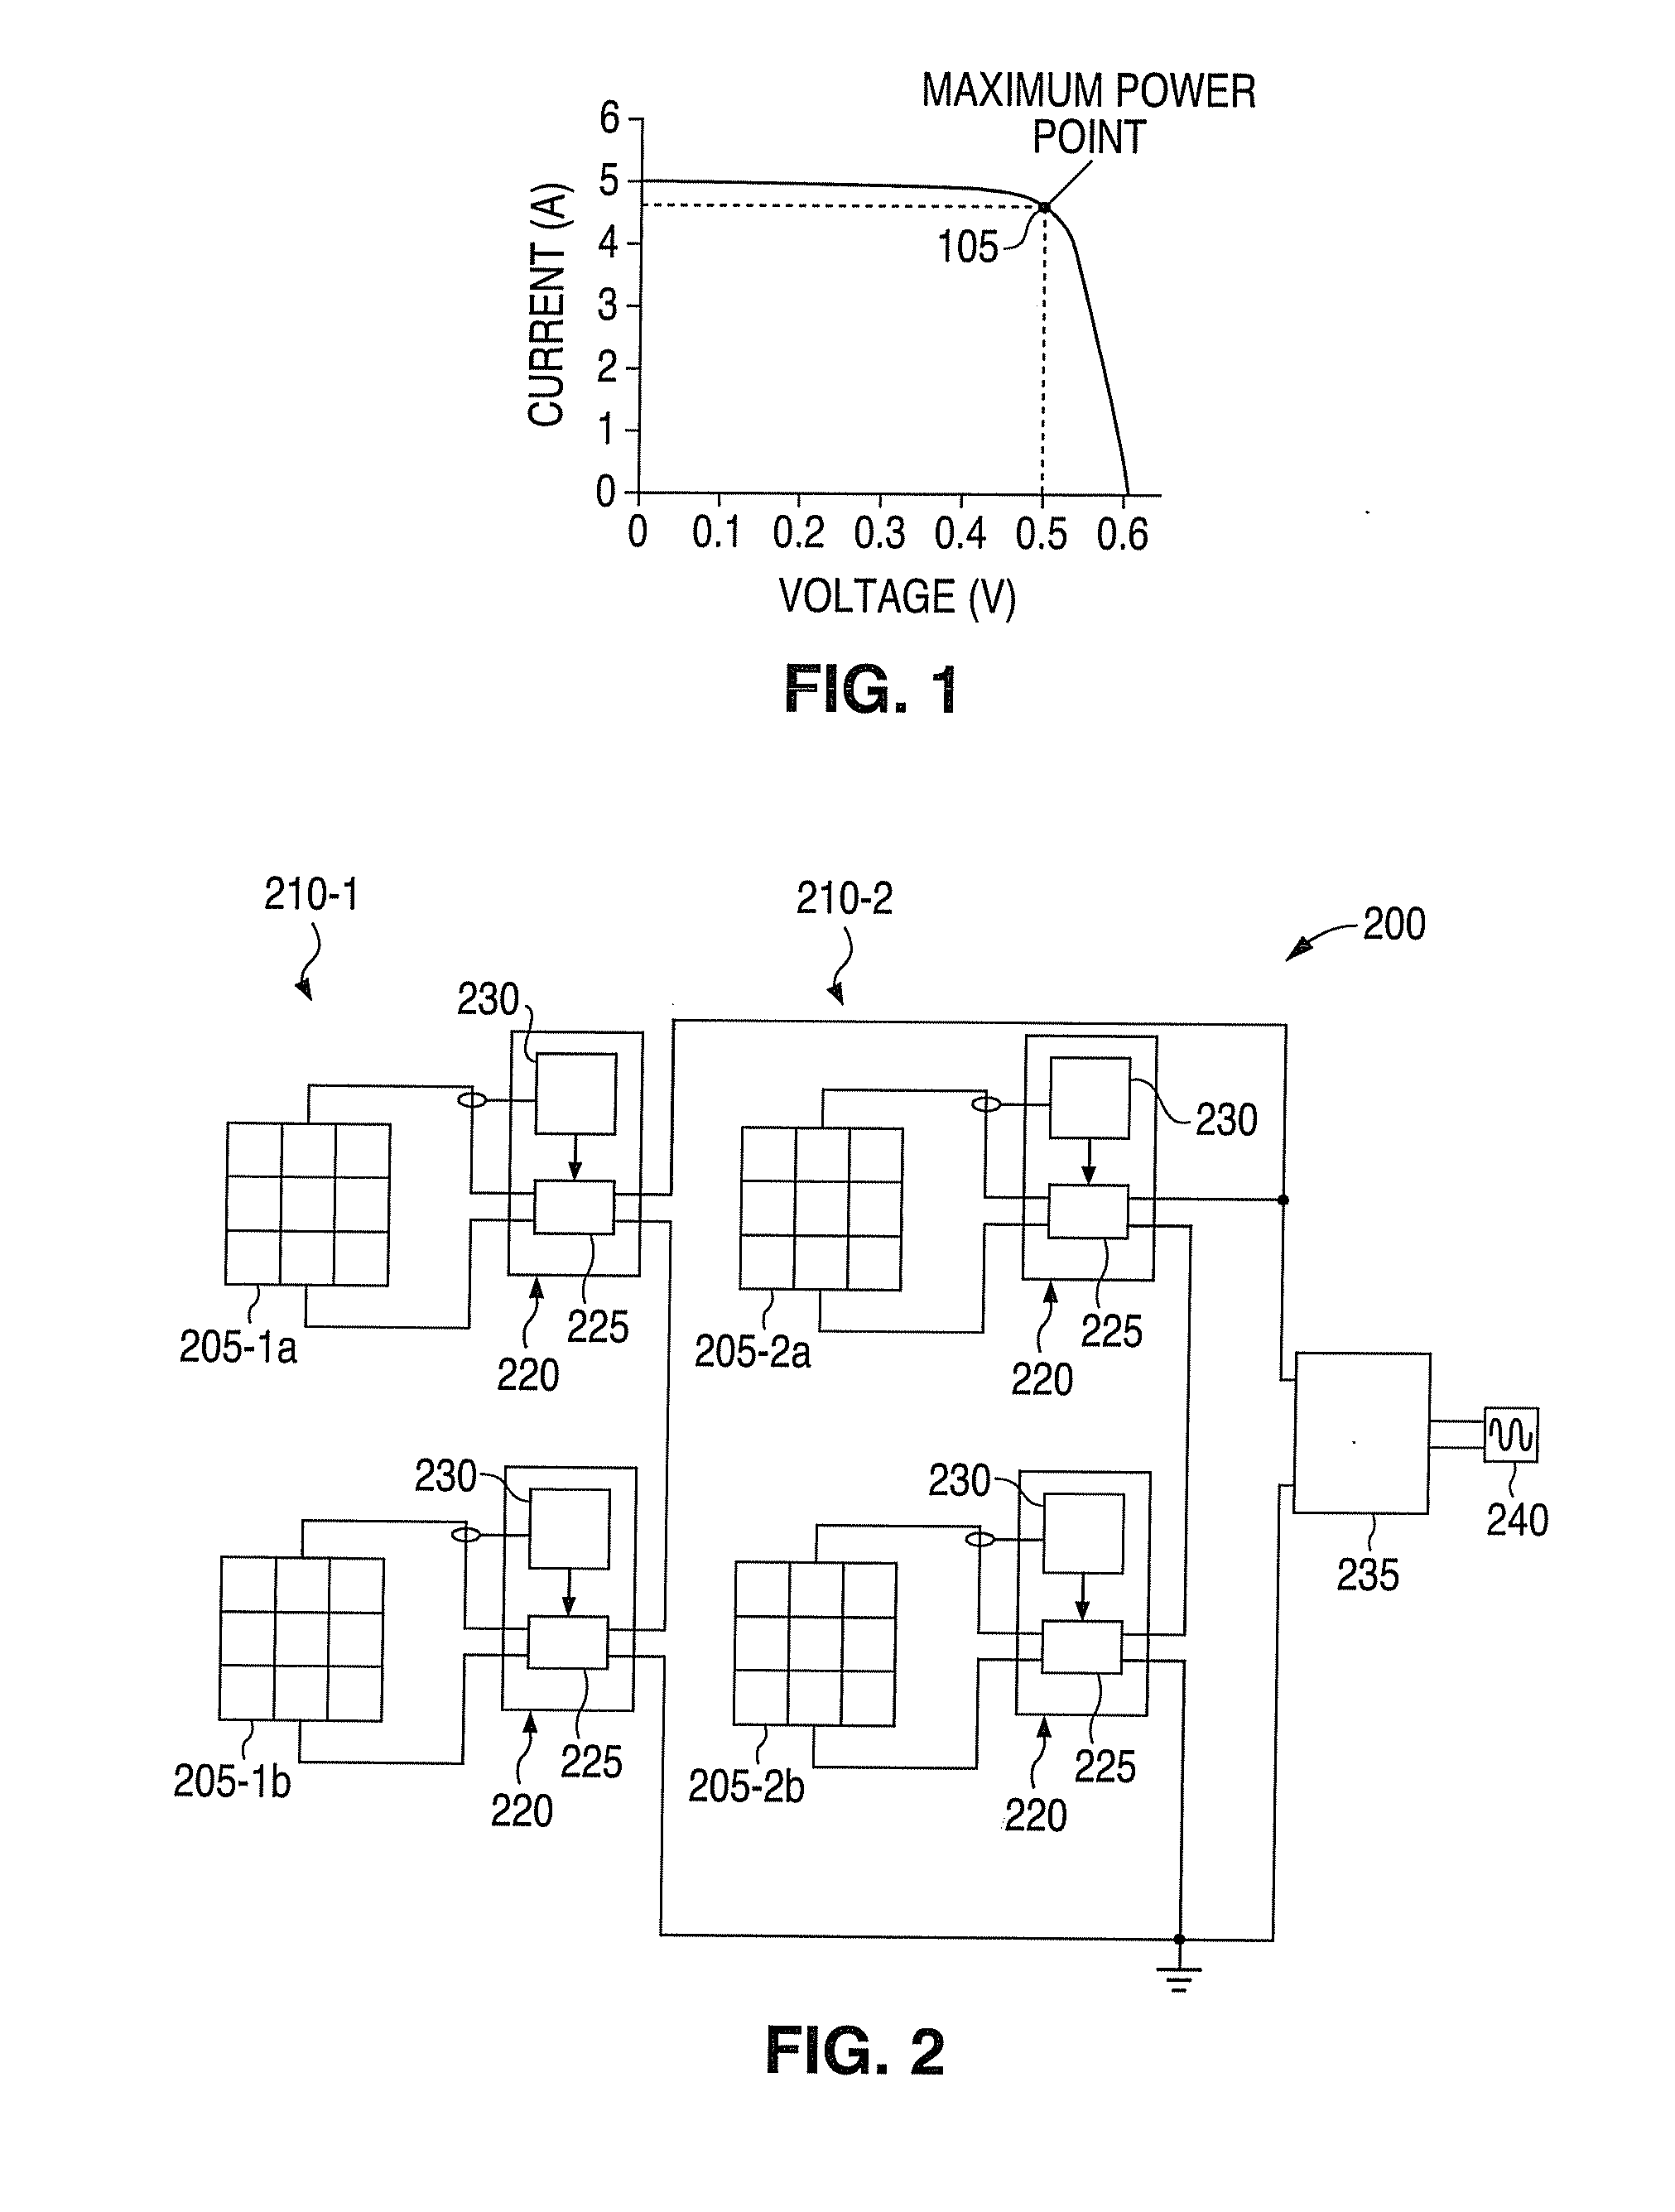 System and method for over-Voltage protection of a photovoltaic string with distributed maximum power point tracking